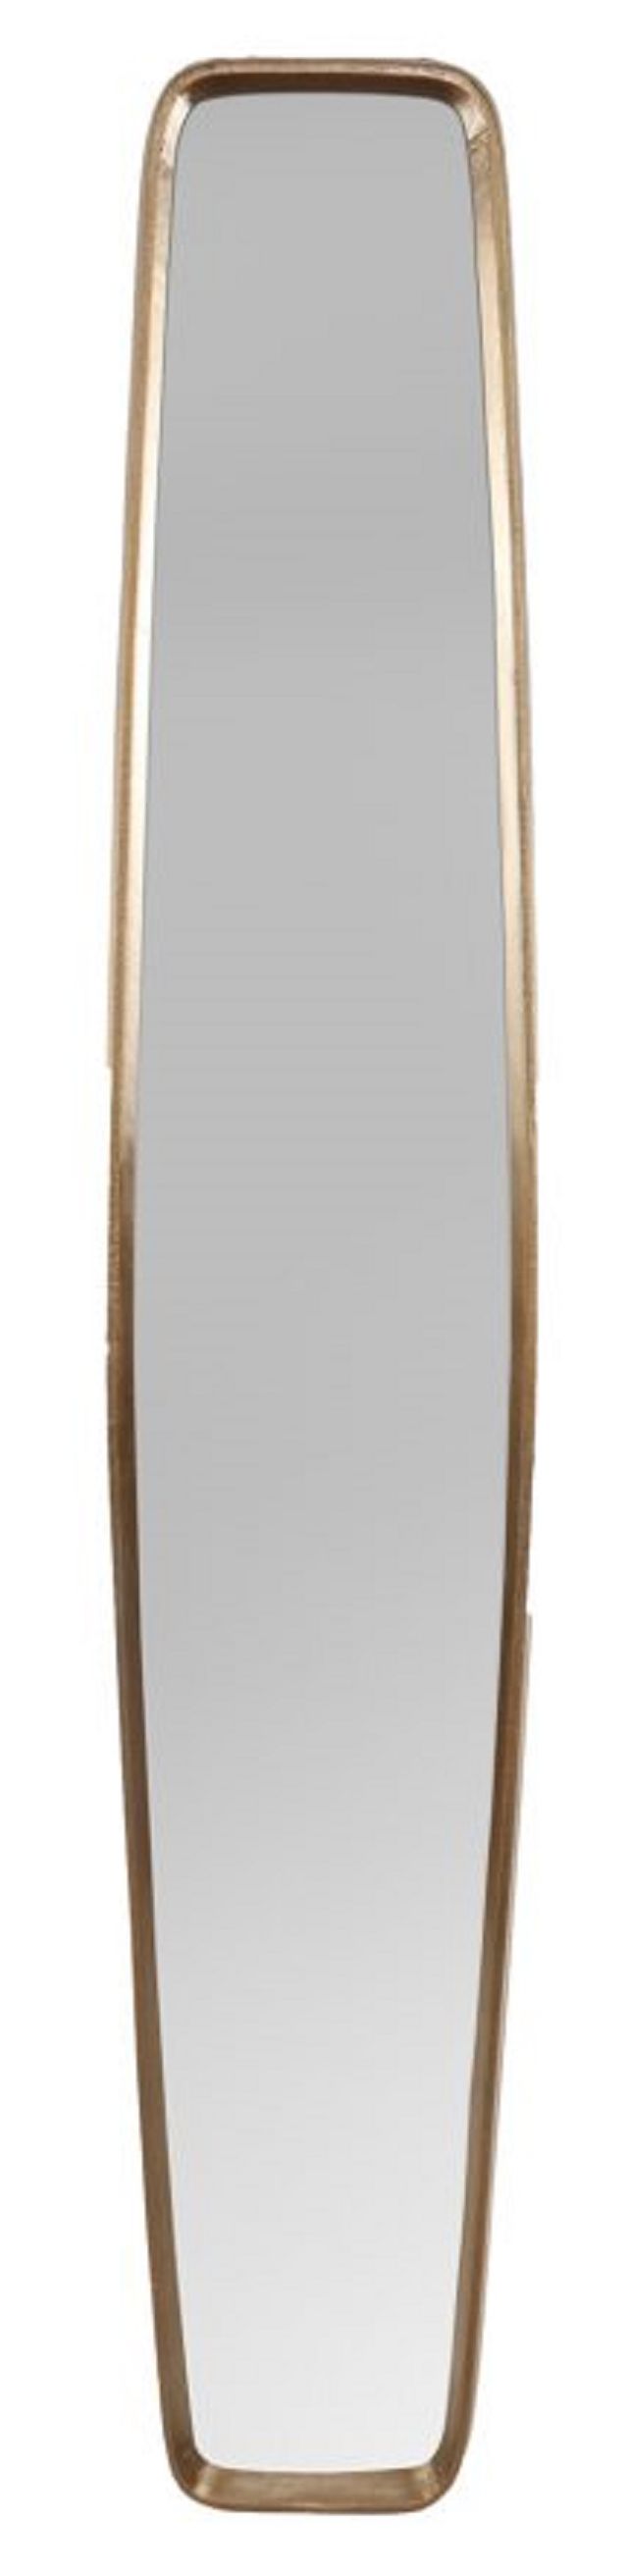 Moe's Home Collections Fitzroy Gold Tall Mirror 0